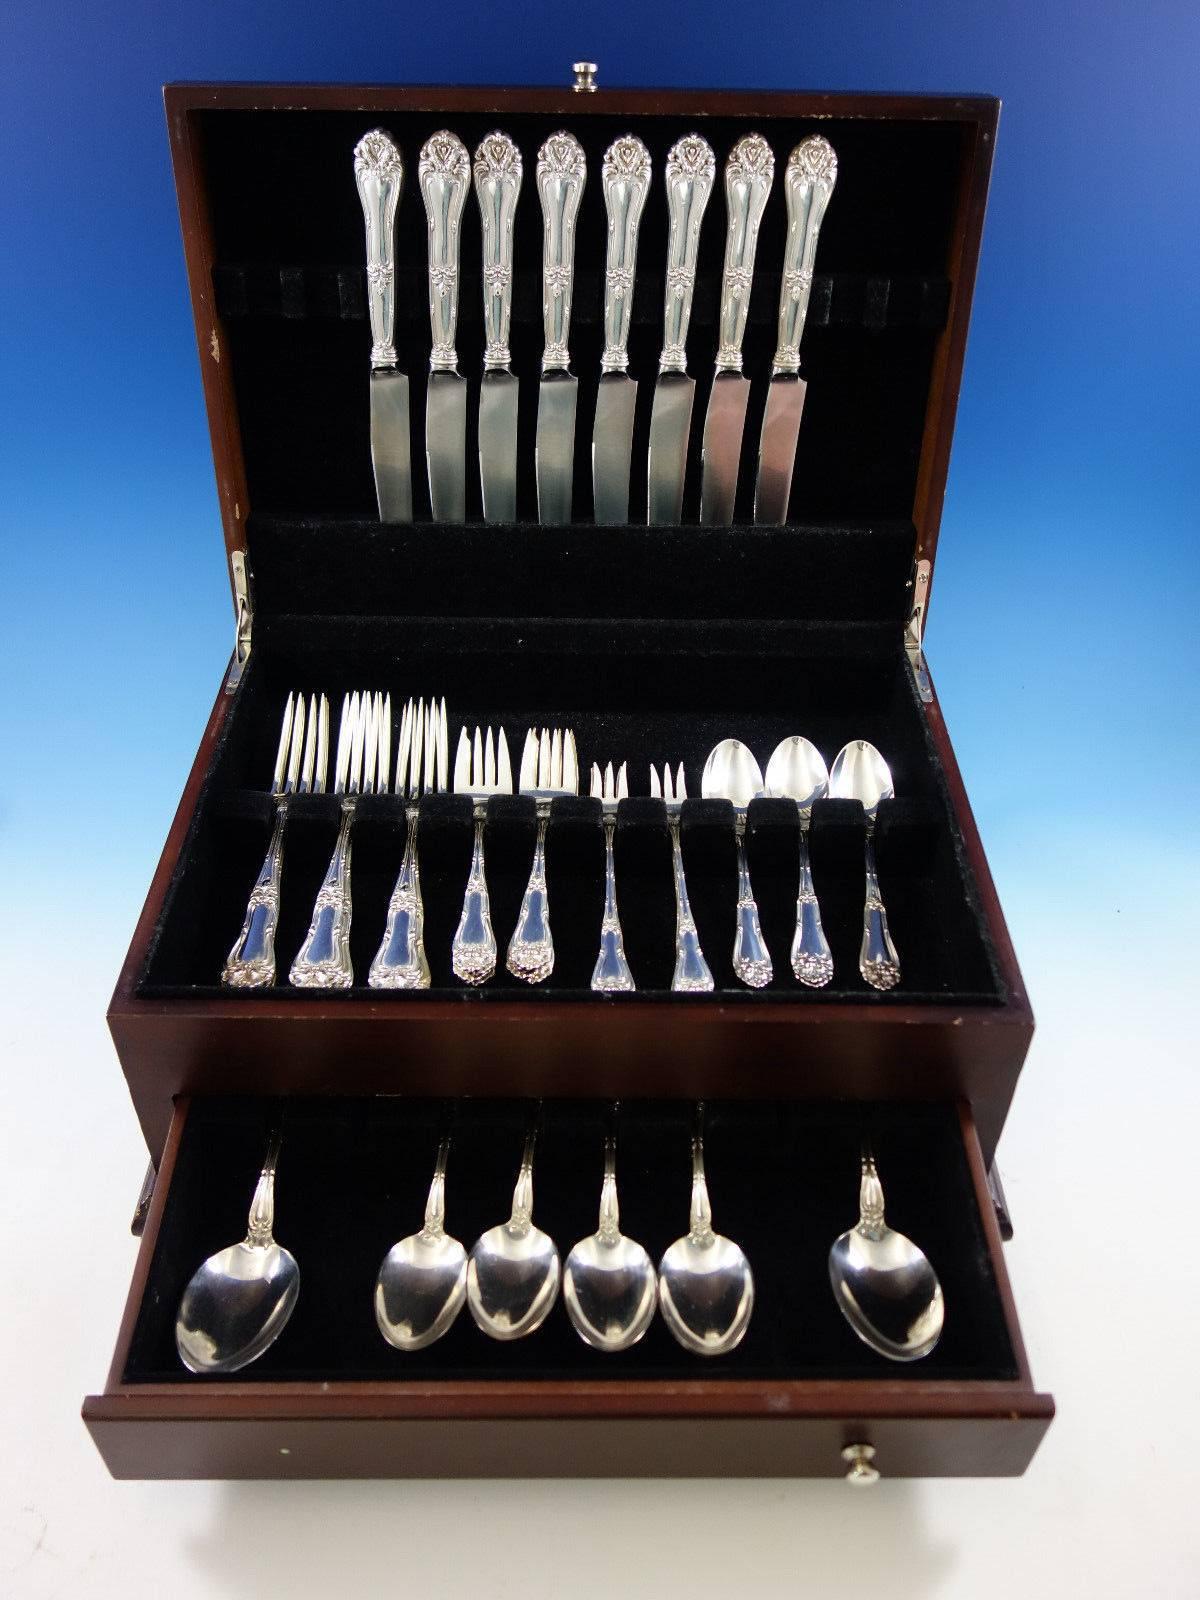 This set includes:

Eight dinner size knives, 9 3/4